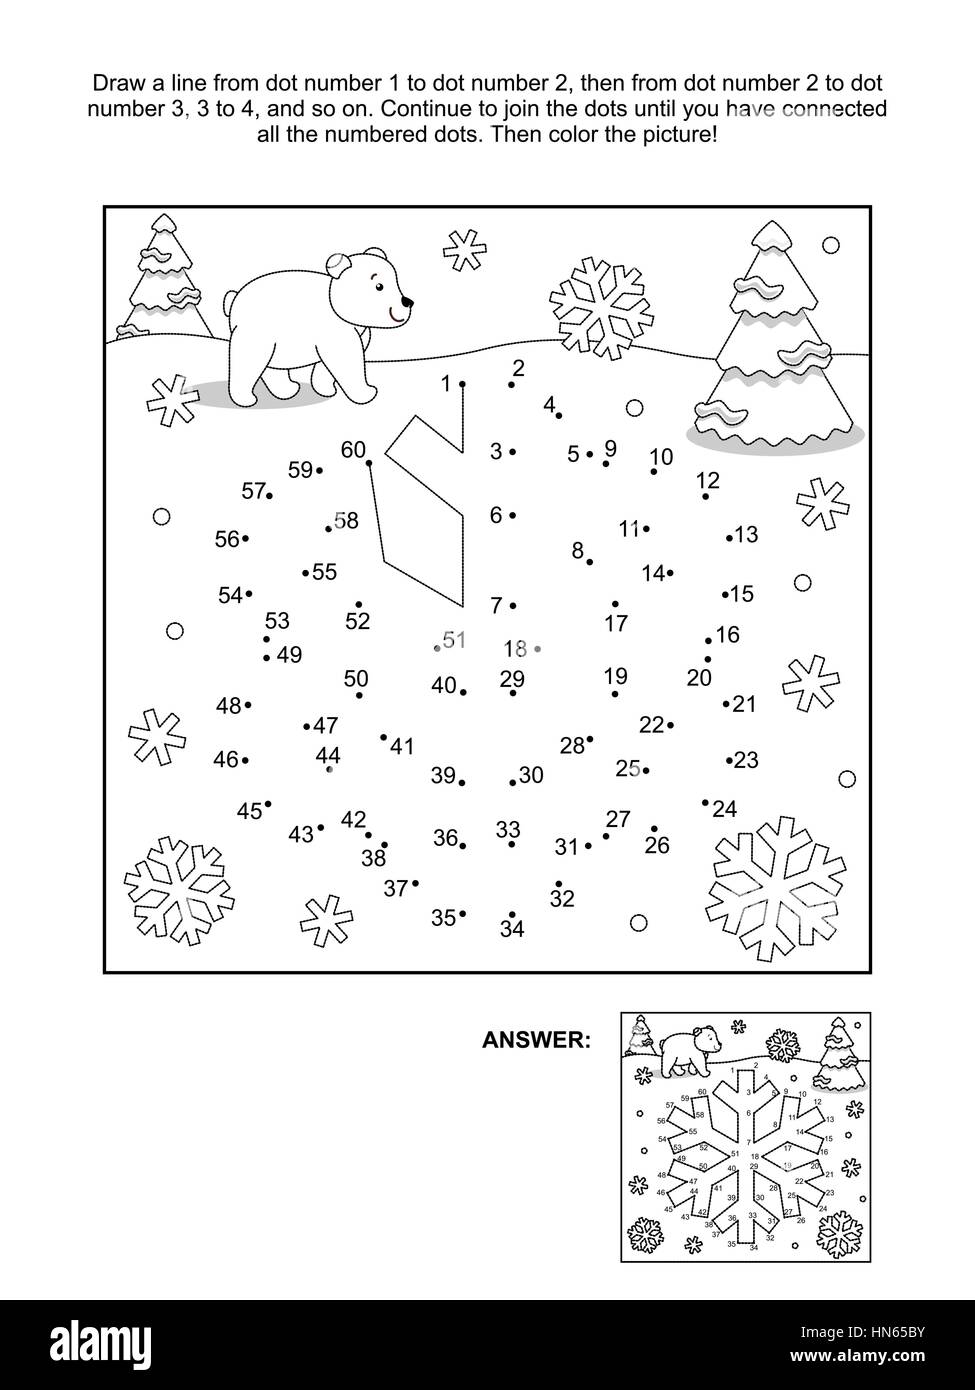 Winter, New Year or Christmas themed connect the dots picture puzzle and coloring page - snowflake. Answer included. Stock Vector